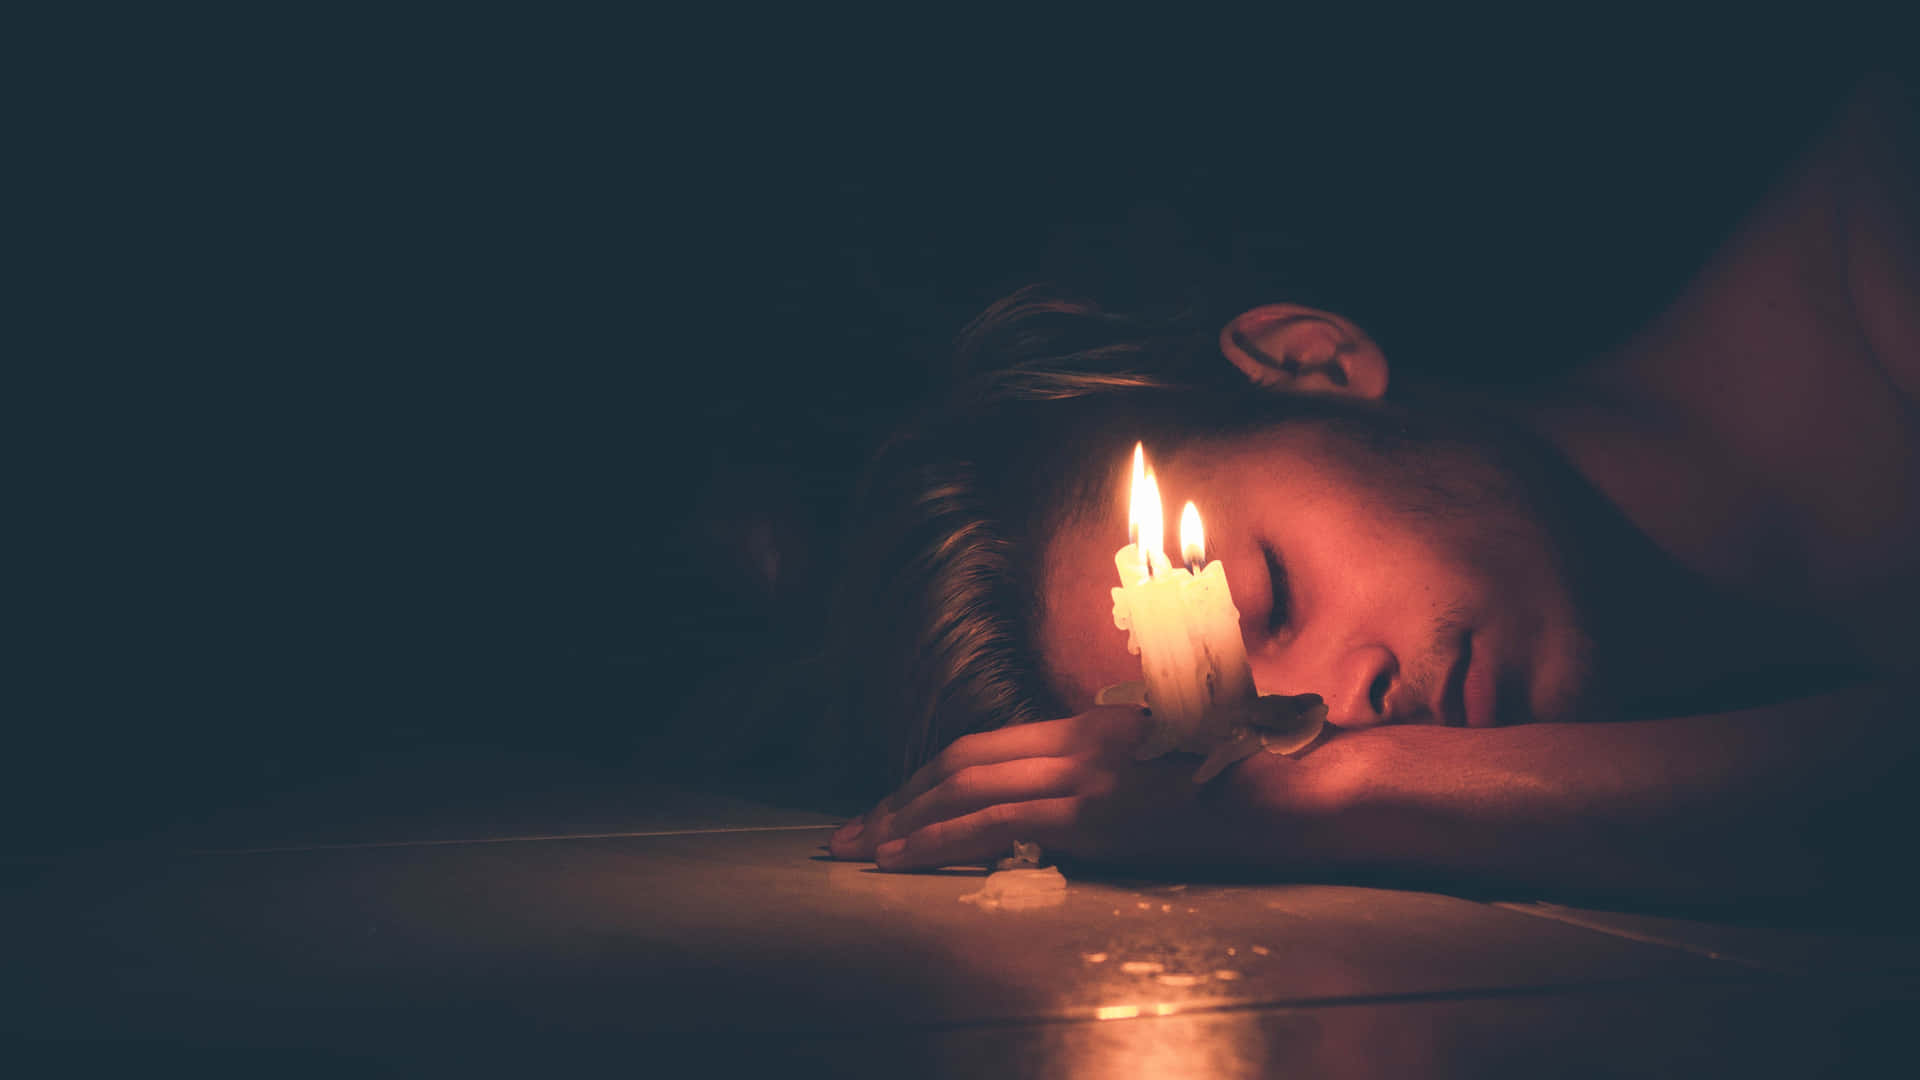 A Look of Melancholic Reflection - Cool Sad Boy with Candle Wallpaper